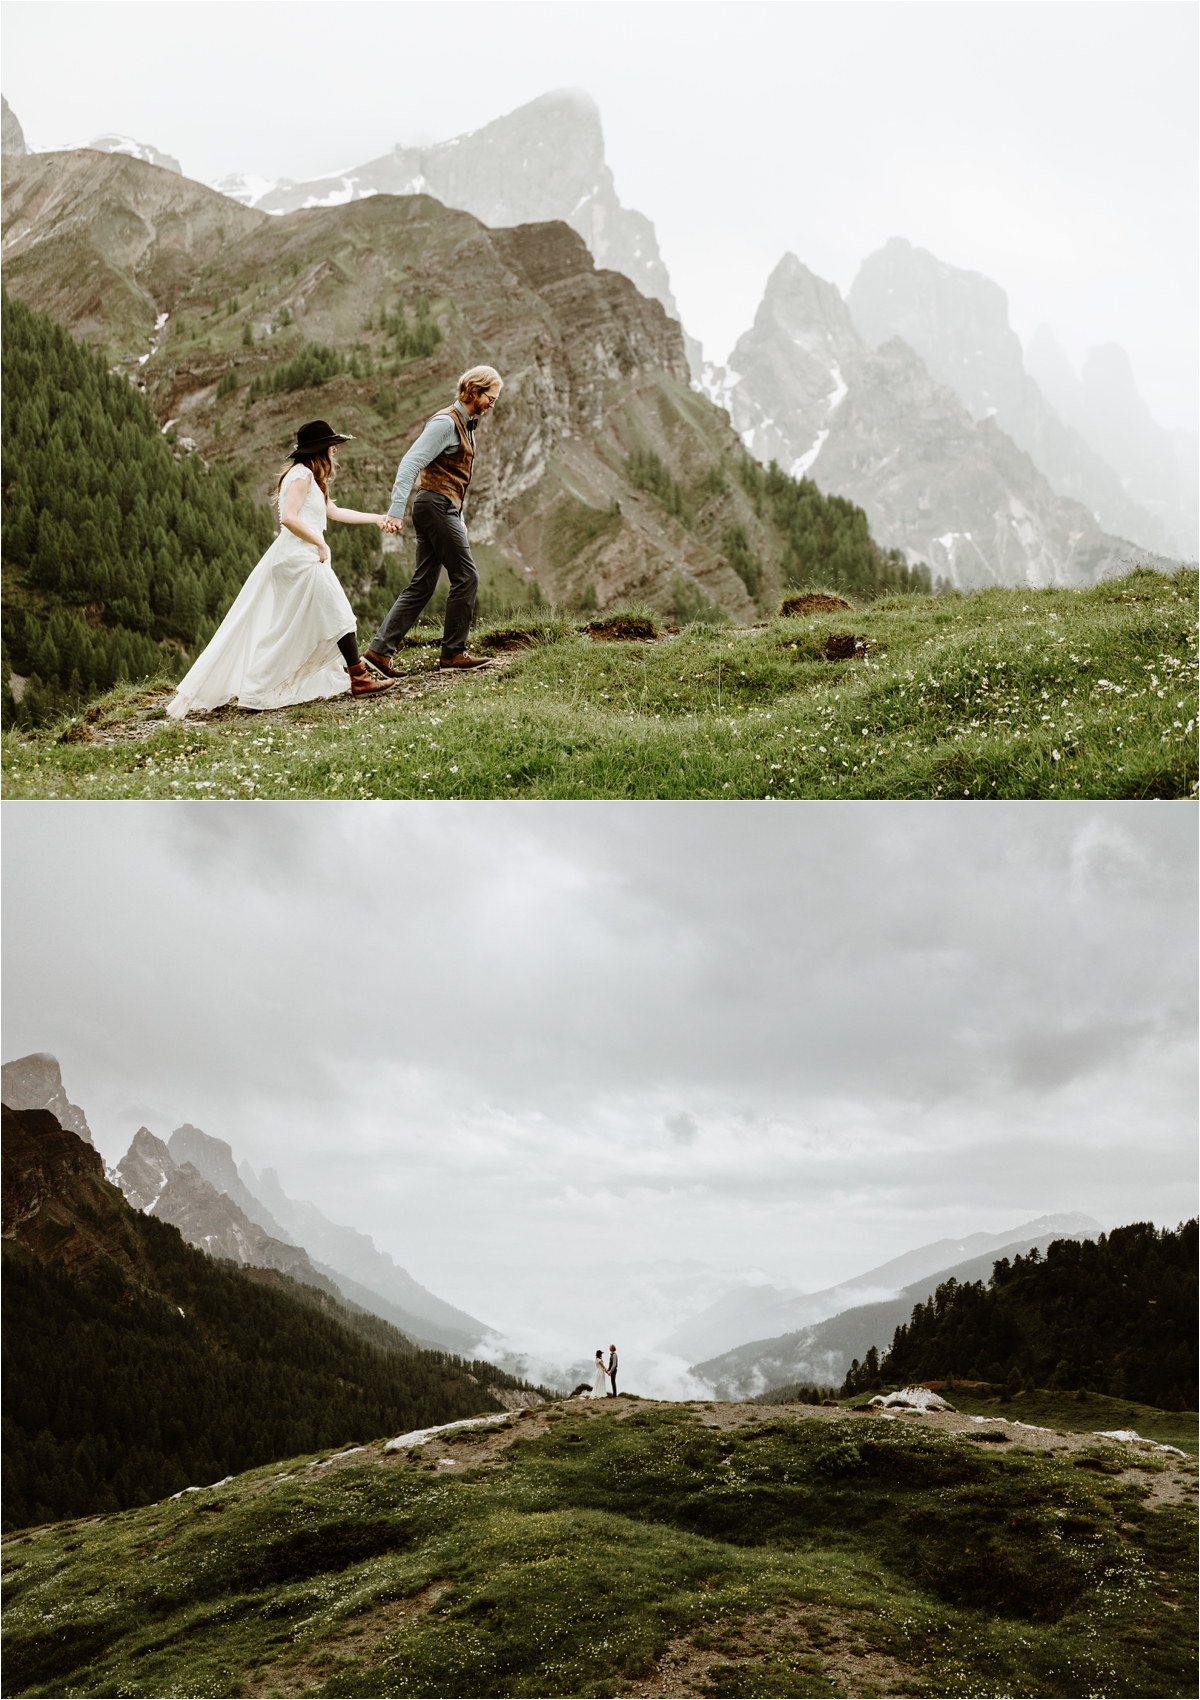 Adam & Michelle hike up to the location where they want to have their elopement vows ceremony. Photography by Wild Connections Photography